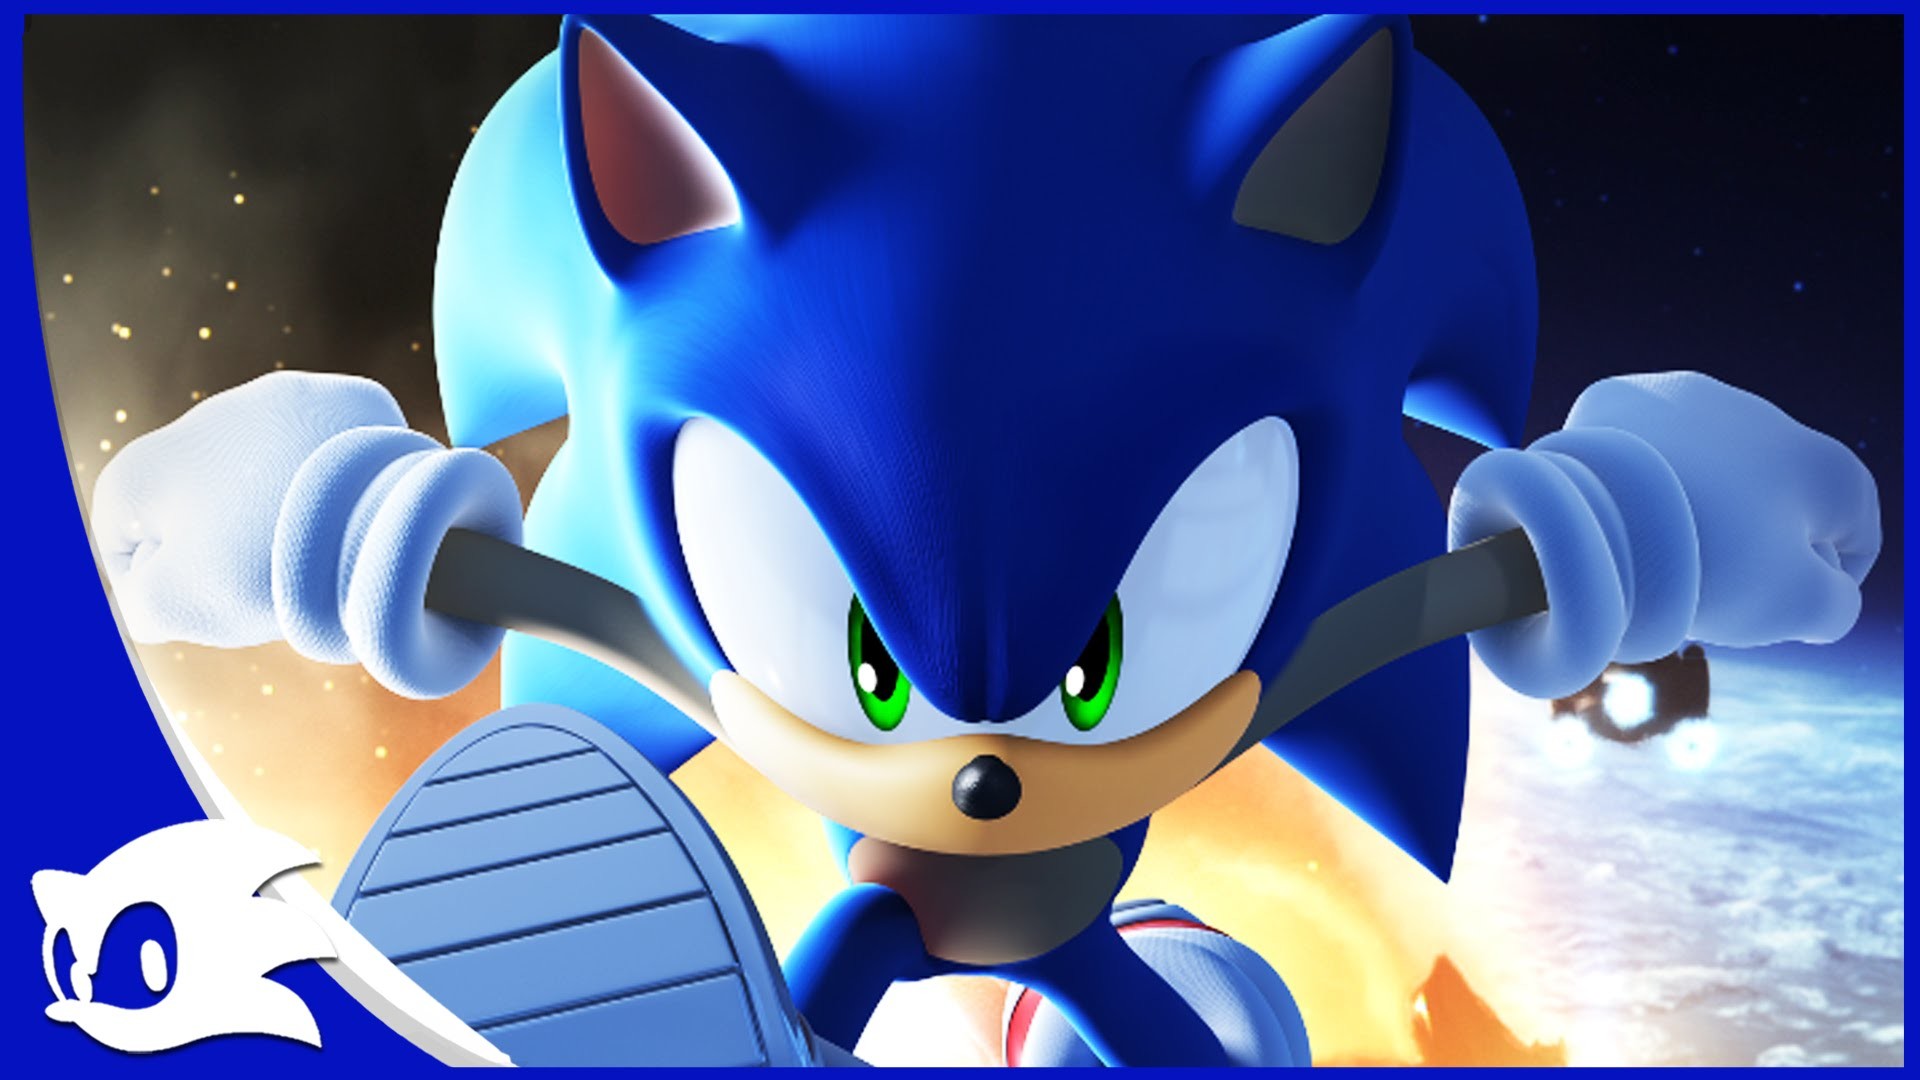 Sonic Wallpaper Android Sonic The Hedgehog Cartoon Animated Cartoon Fictional Character Animation 7797 Wallpaperuse